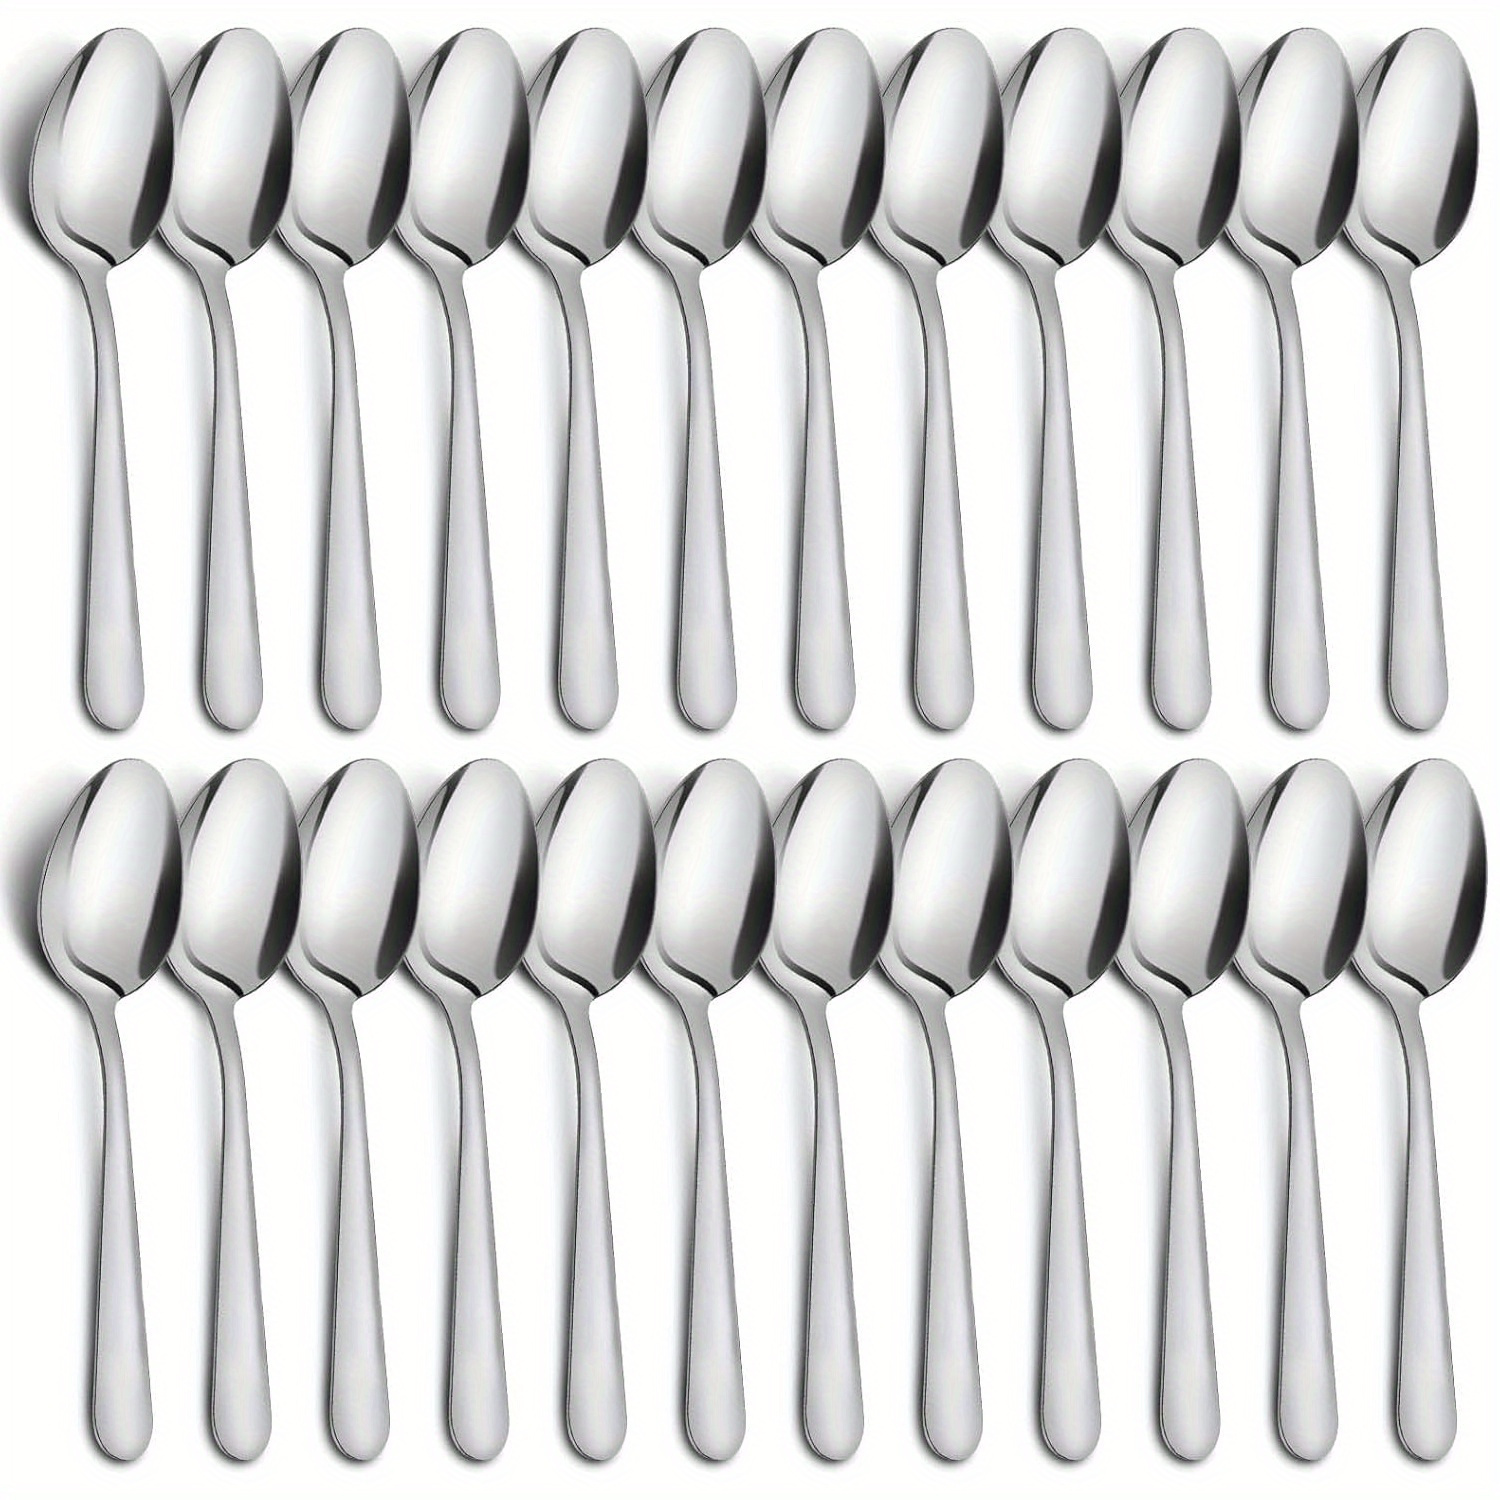 

6/12/24 Pcs Dinner Spoons Set, 6.7" Stainless Steel Spoons Silverware, Durable Dessert Spoons, Table Spoon Use For Home, Kitchen And Restaurant